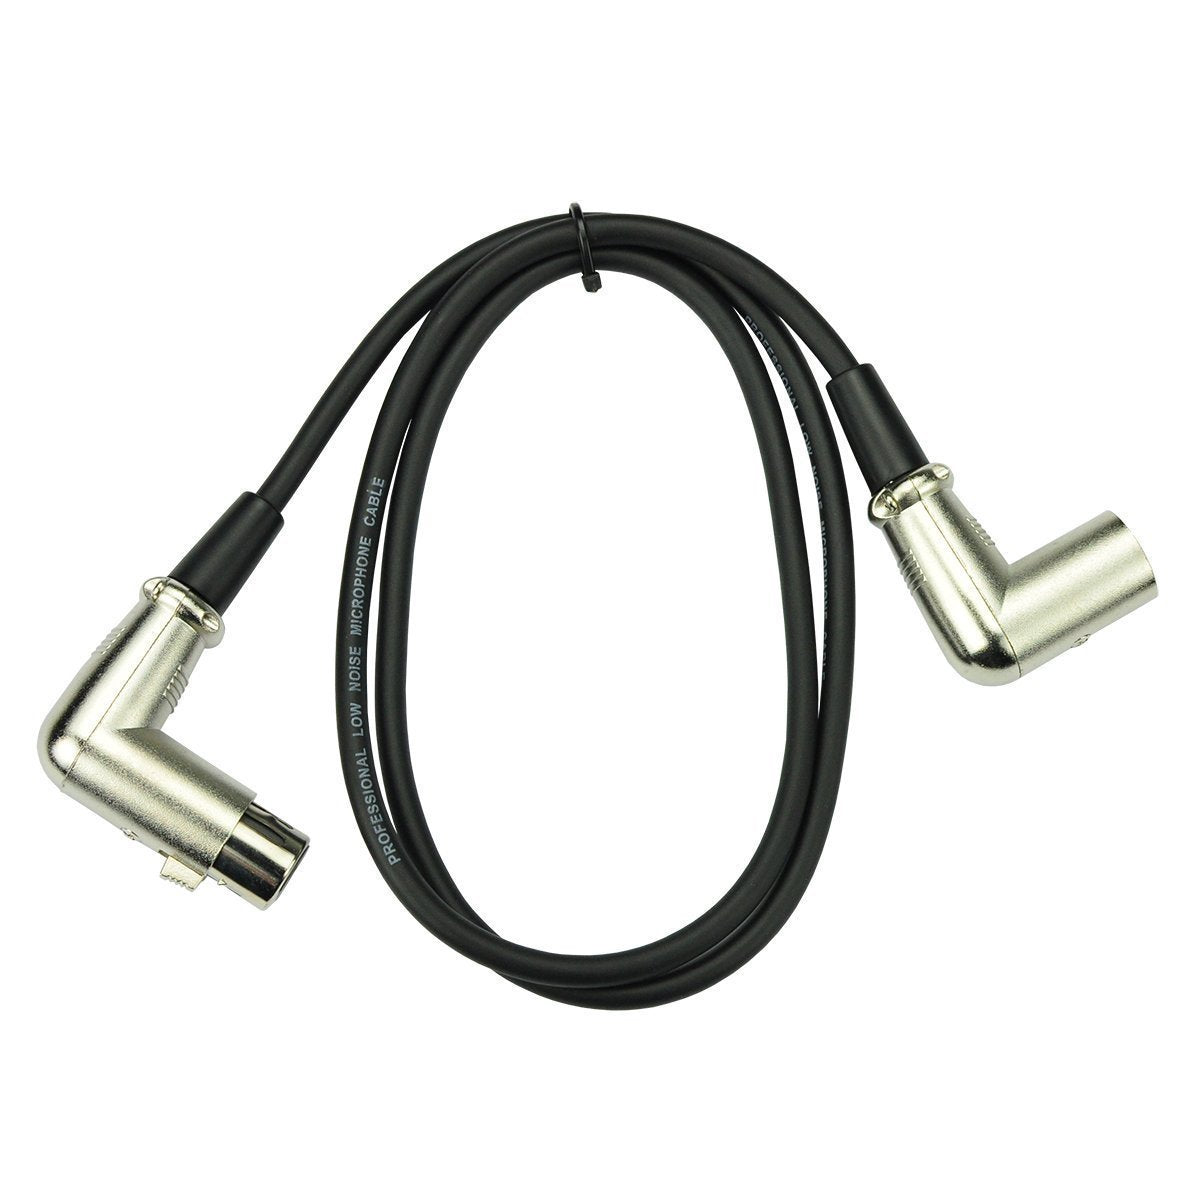 Handy Patch Right Angled Male XLR to Angled Female XLR Cable (1m)